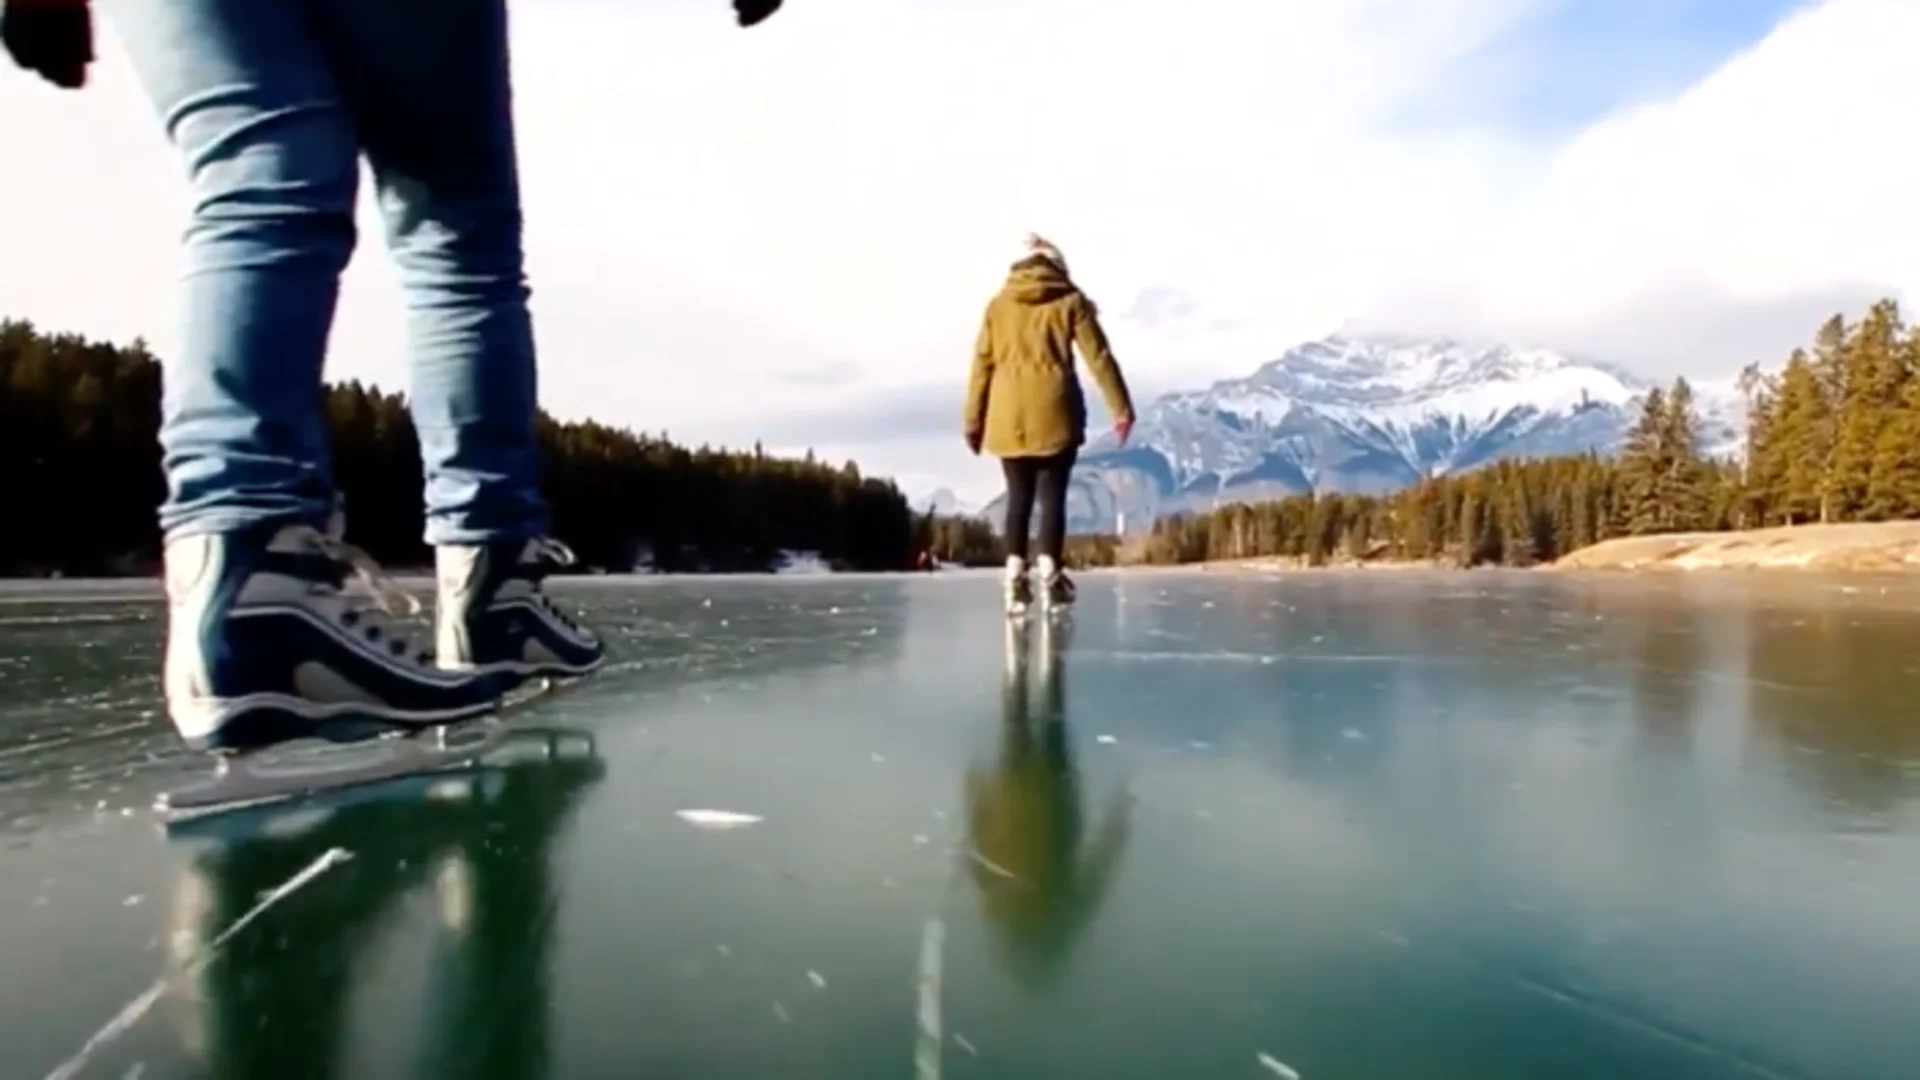 Careful on the ice: Winter drownings may increase in Canada, new study says